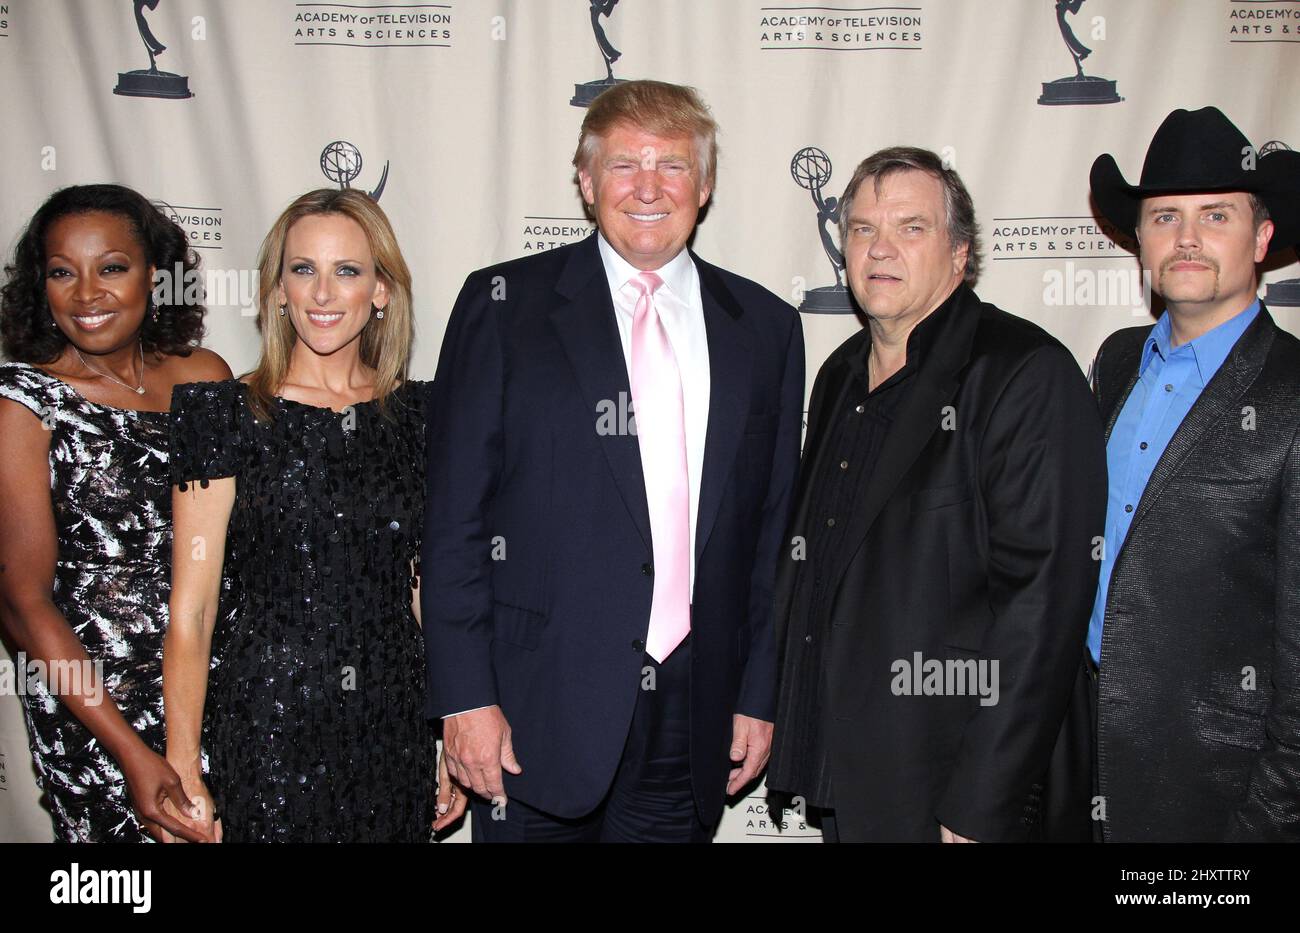 Star Jones, Marlee Matlin, Donald Trump, Meat Loaf and John Rich at an evening with 'The Celebrity Apprentice' held at Florence Gould Hall, New York. Stock Photo